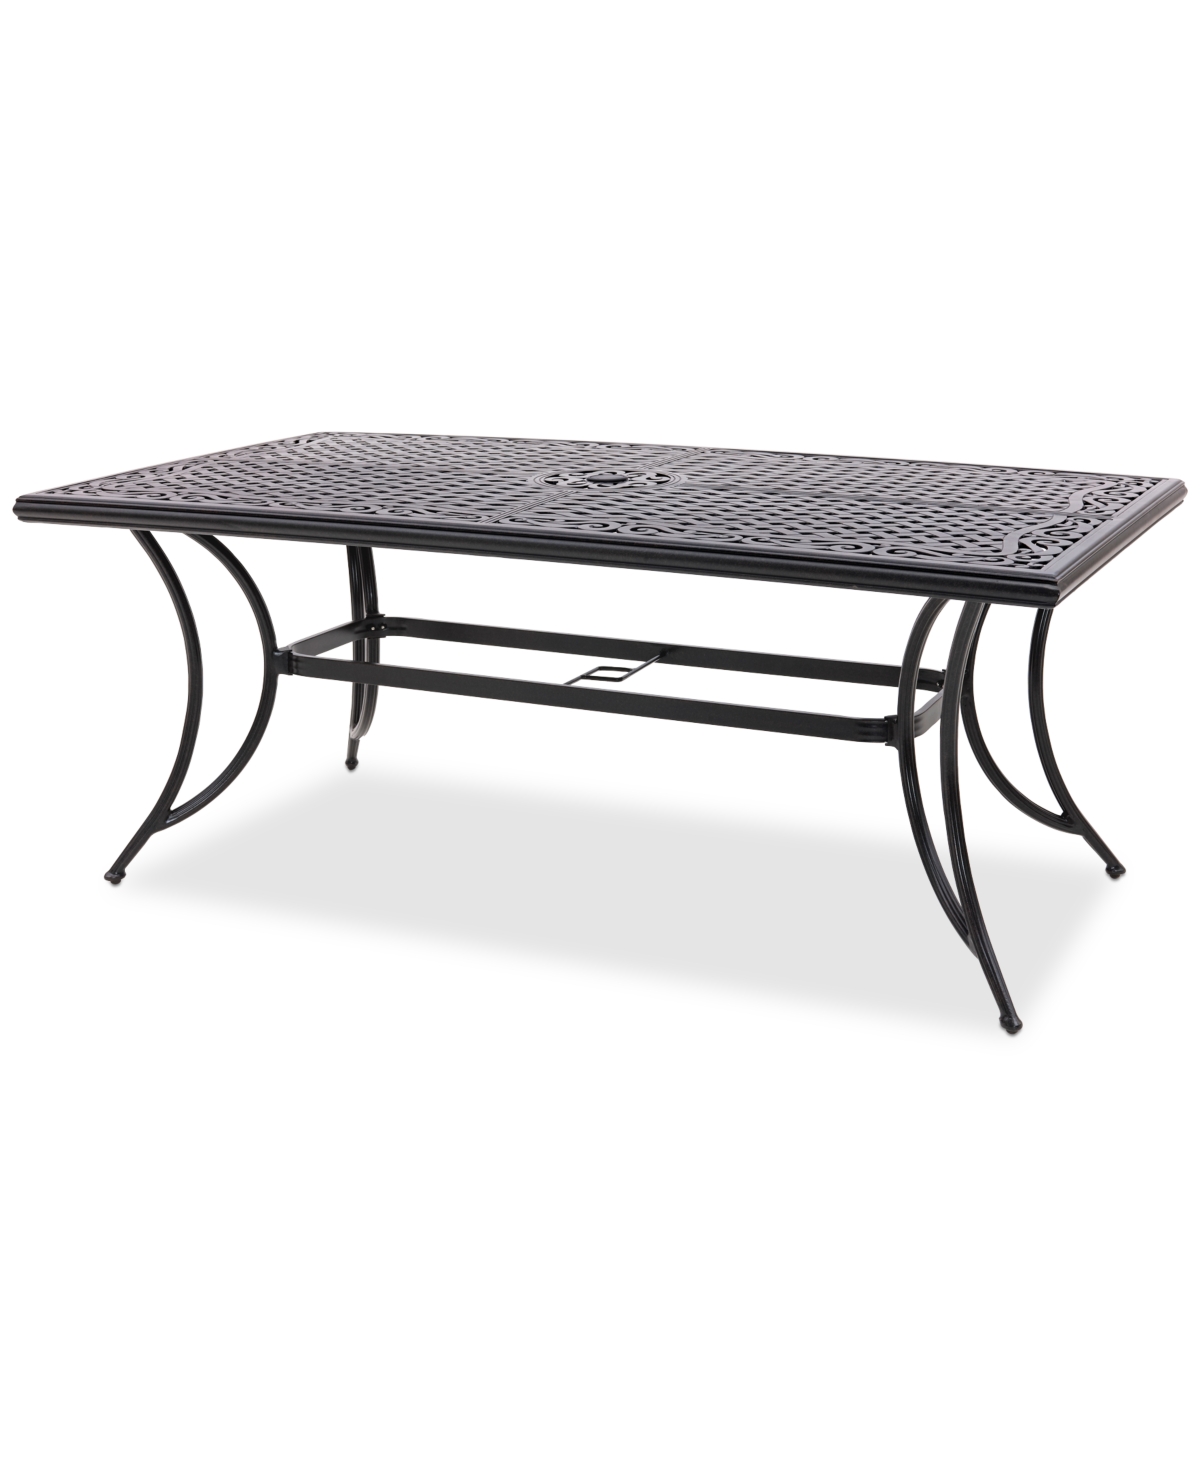 Agio Wythburn Mix And Match 72"x 38" Cast Aluminum Outdoor Dining Table In Pewter Finish